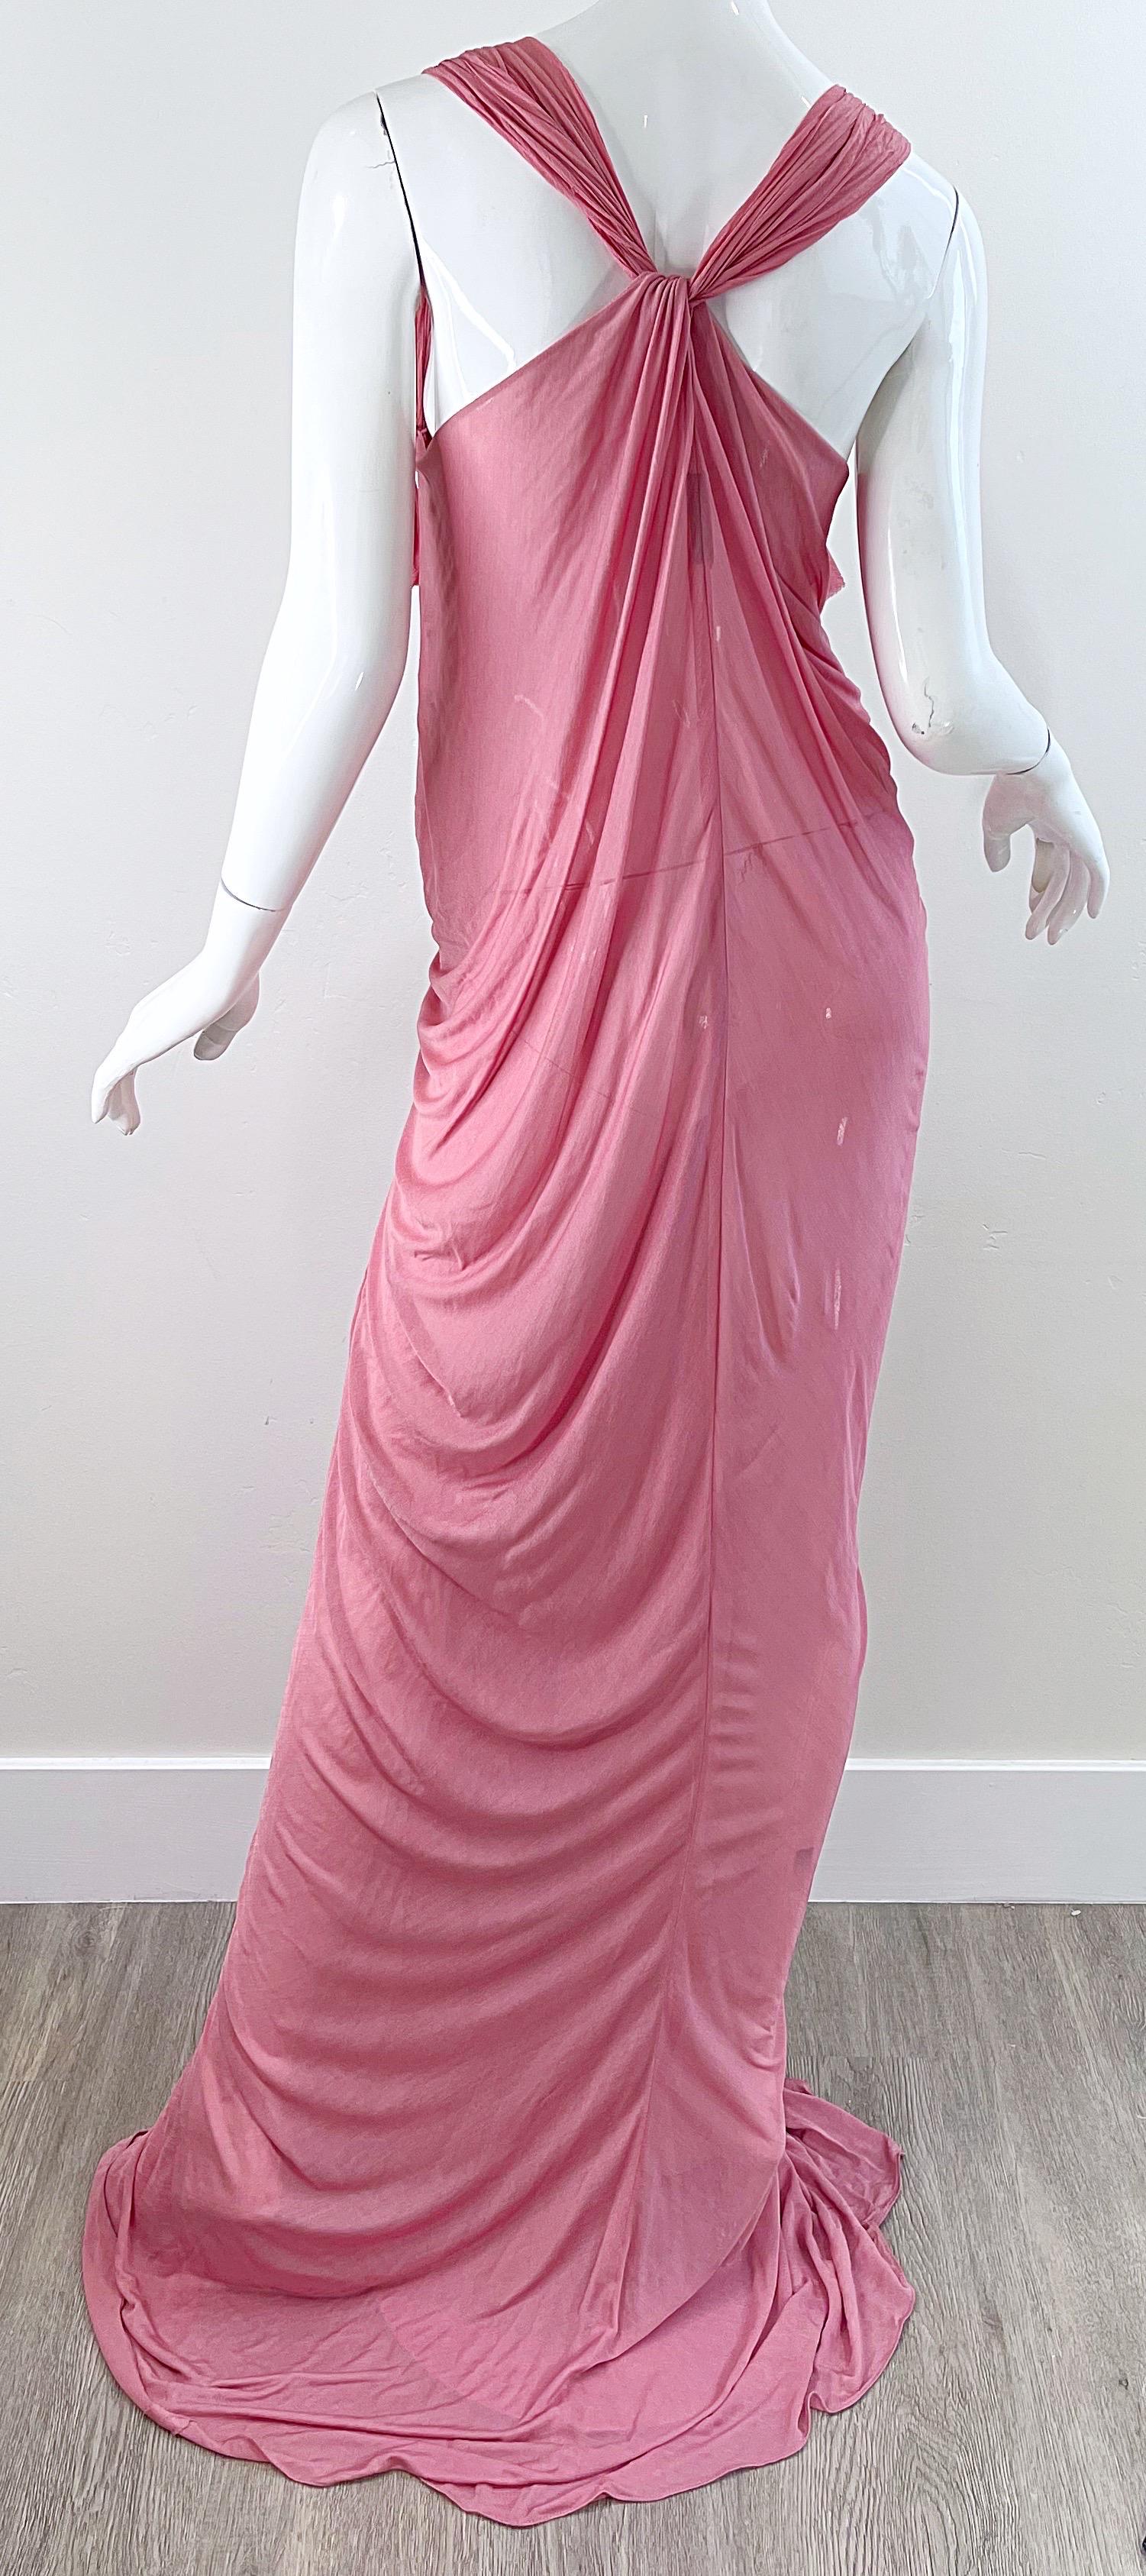 NWT Donna Karan Fall 2005 Pink Dusty Rose Mauve 30s Style Semi Sheer Gown Dress For Sale 3